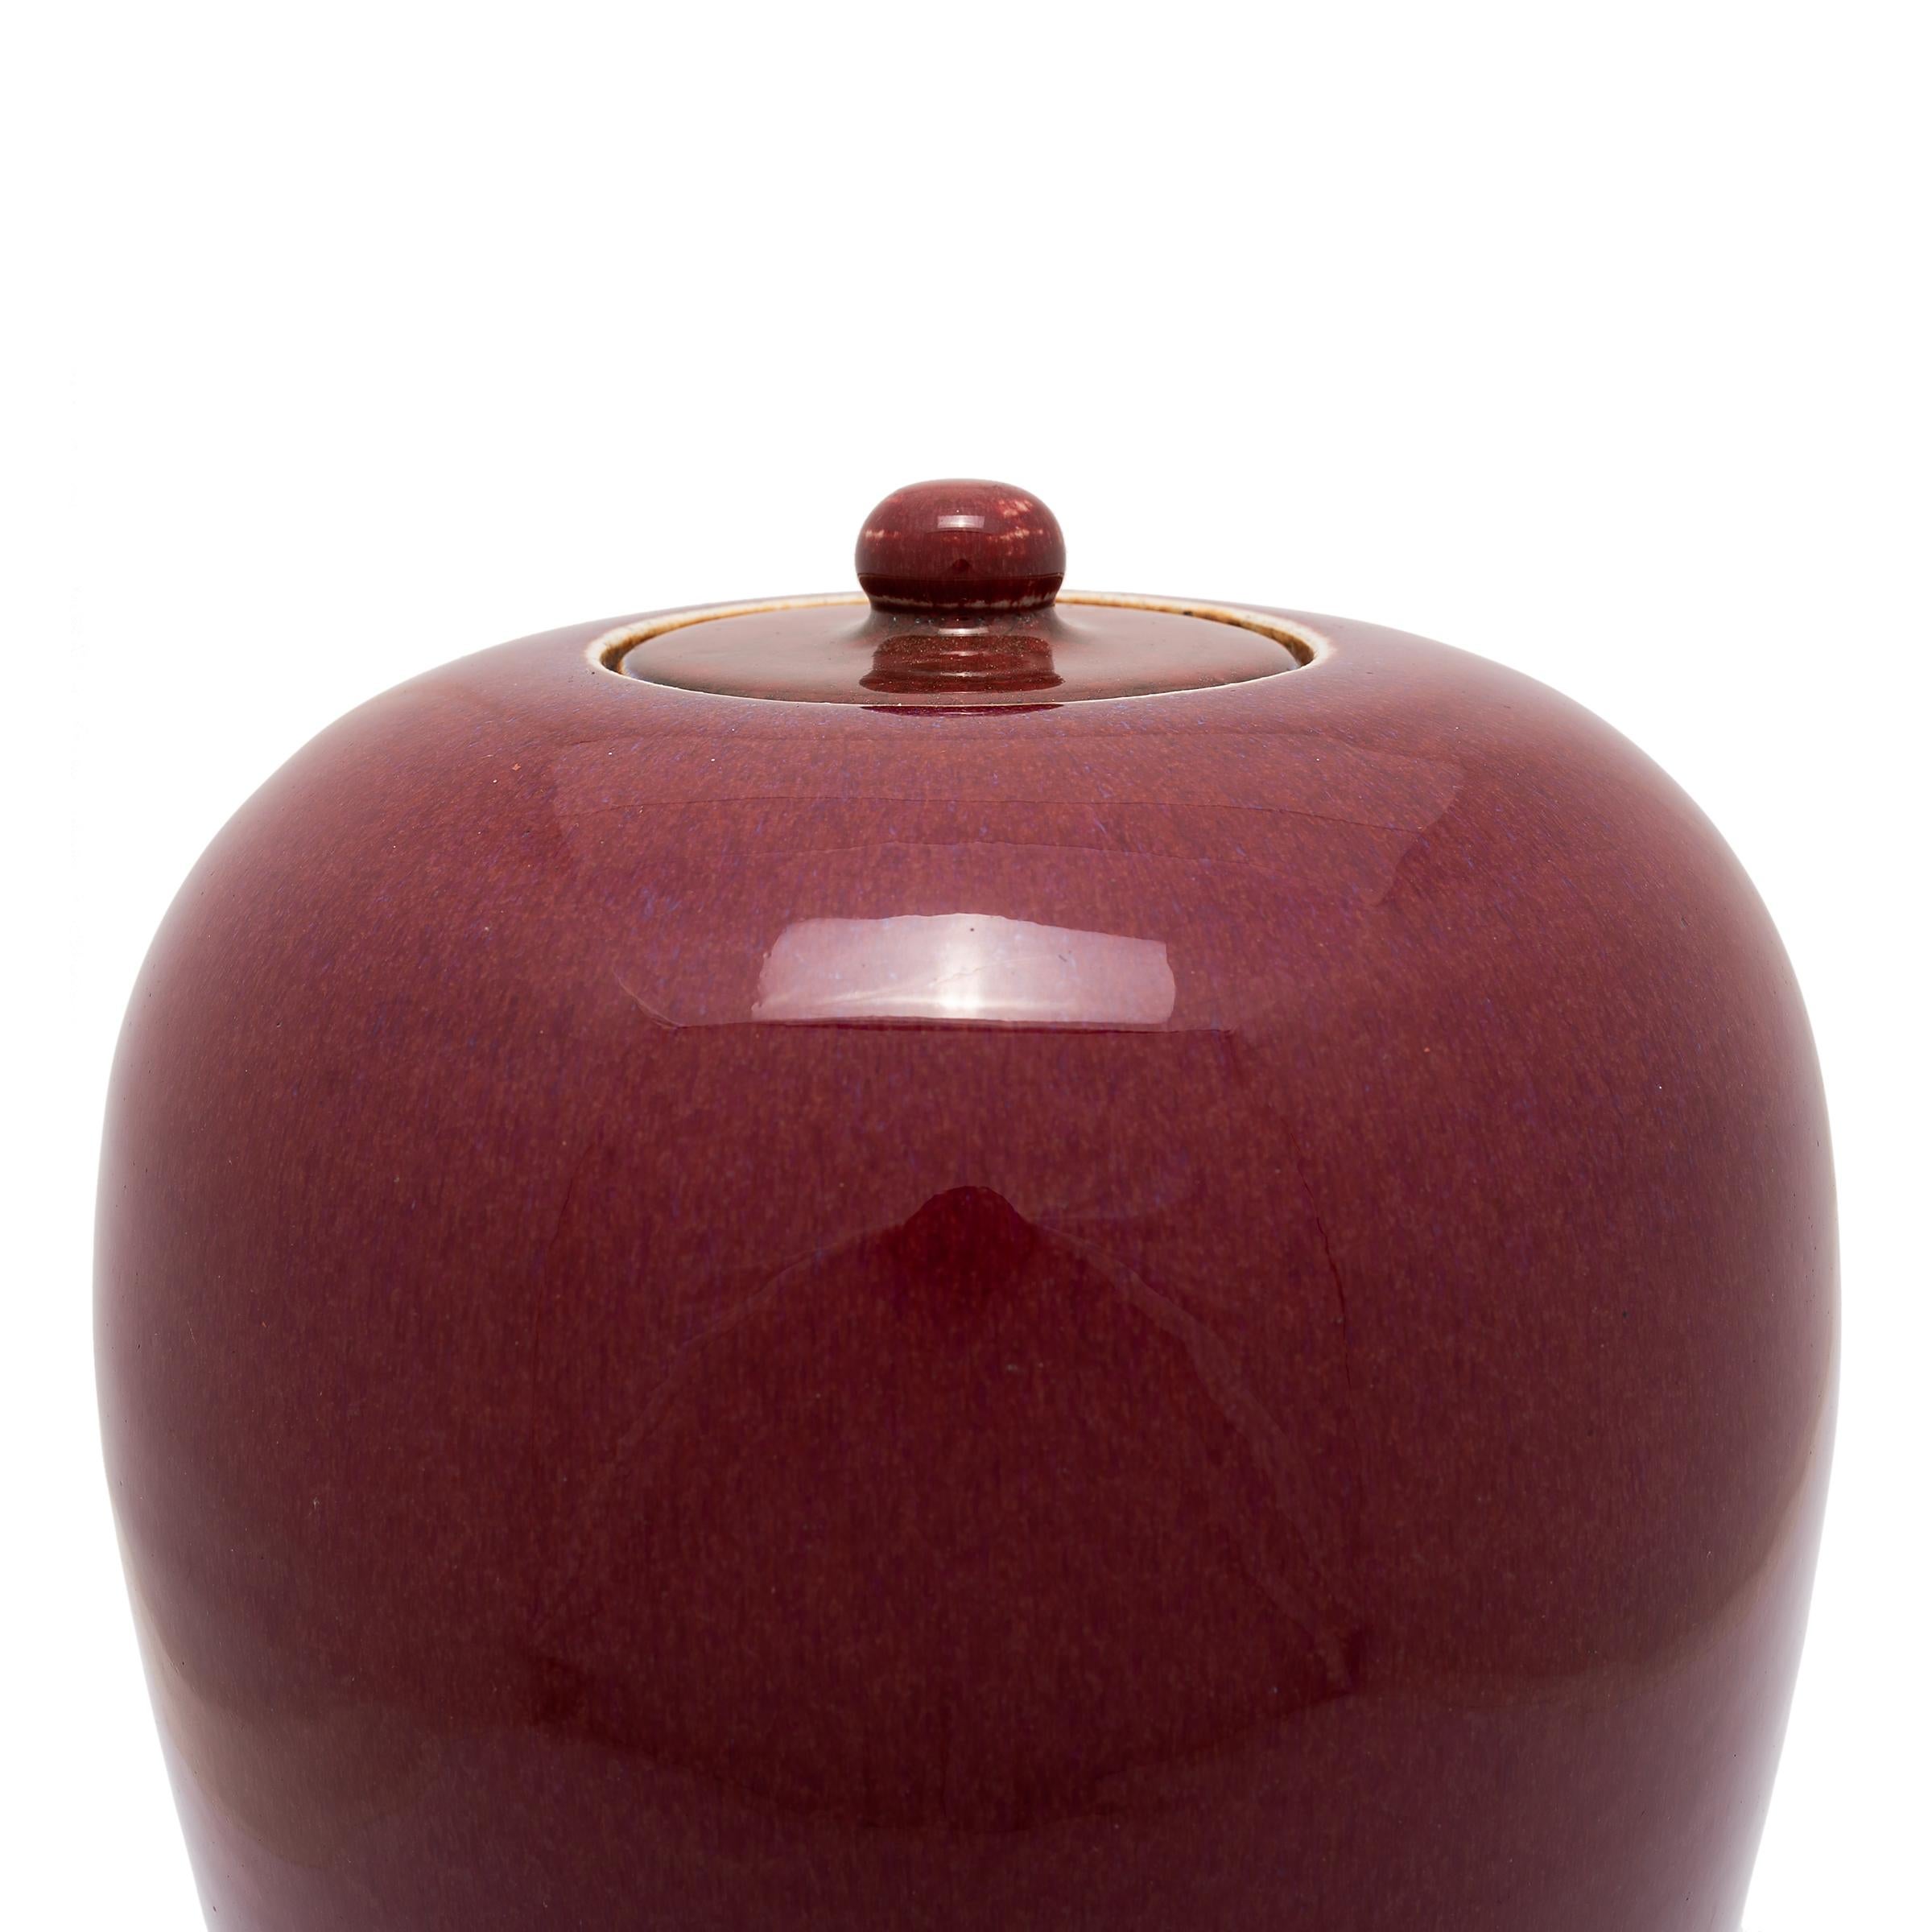 Porcelain Pair of Chinese Oxblood Ginger Jars, c. 1850